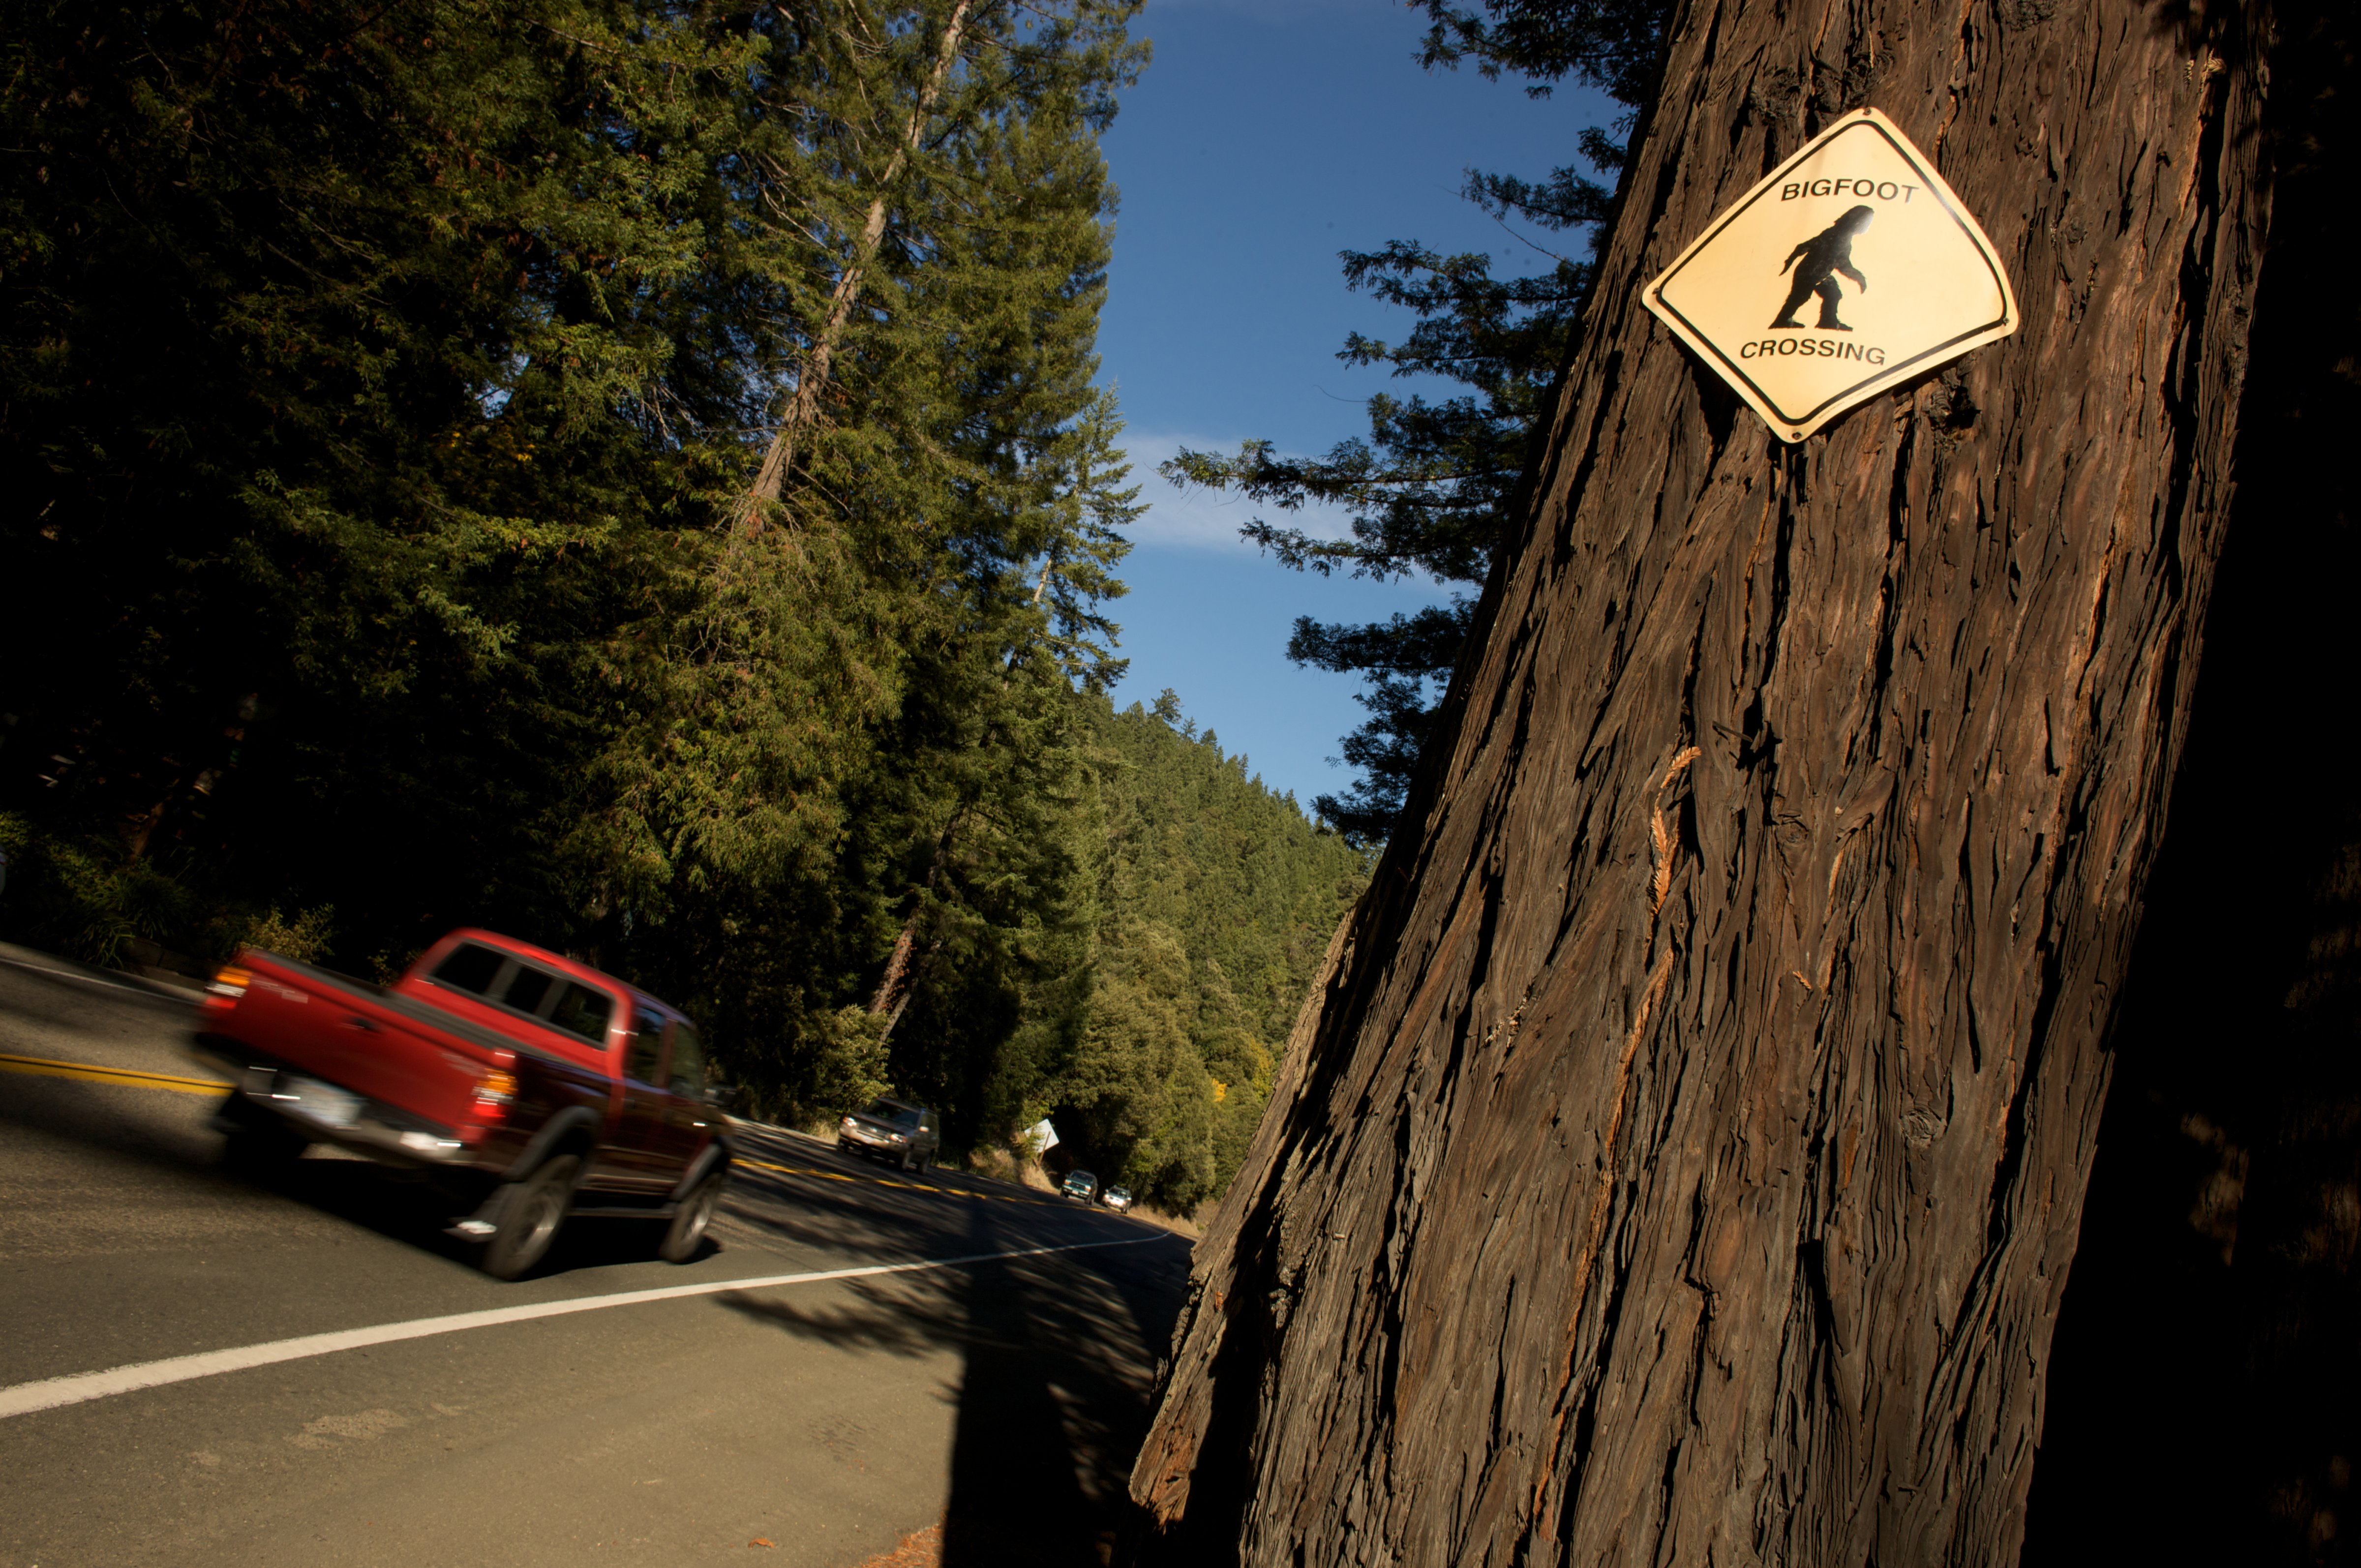 Legend of Bigfoot roadside attraction outside Richardson State Park, Calif. (National Geographic/Getty Images)